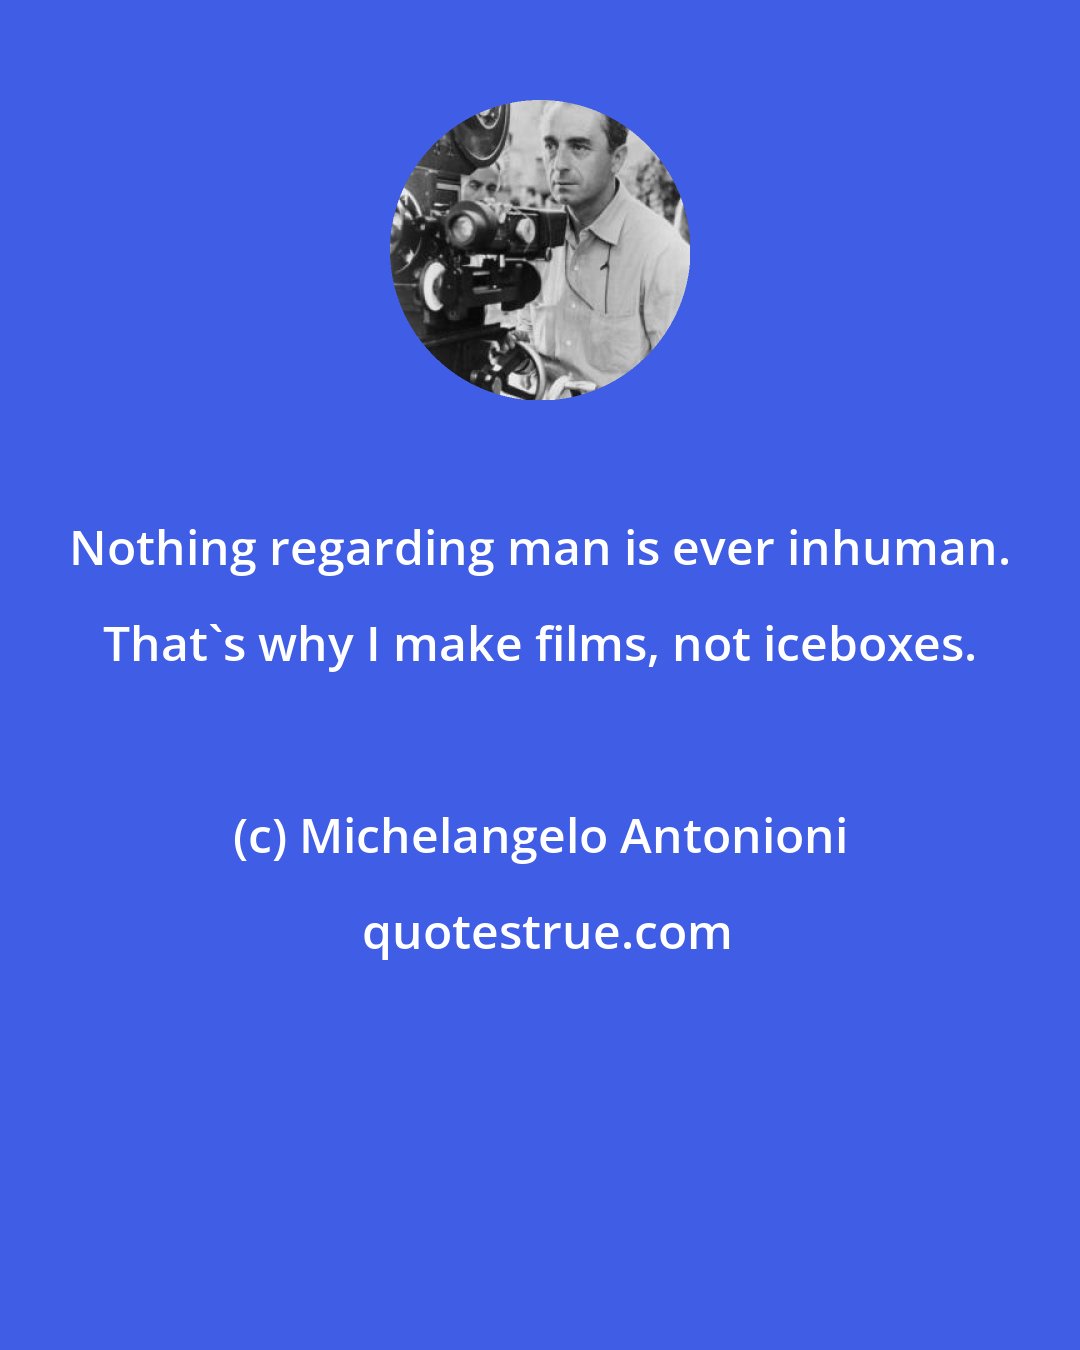 Michelangelo Antonioni: Nothing regarding man is ever inhuman. That's why I make films, not iceboxes.